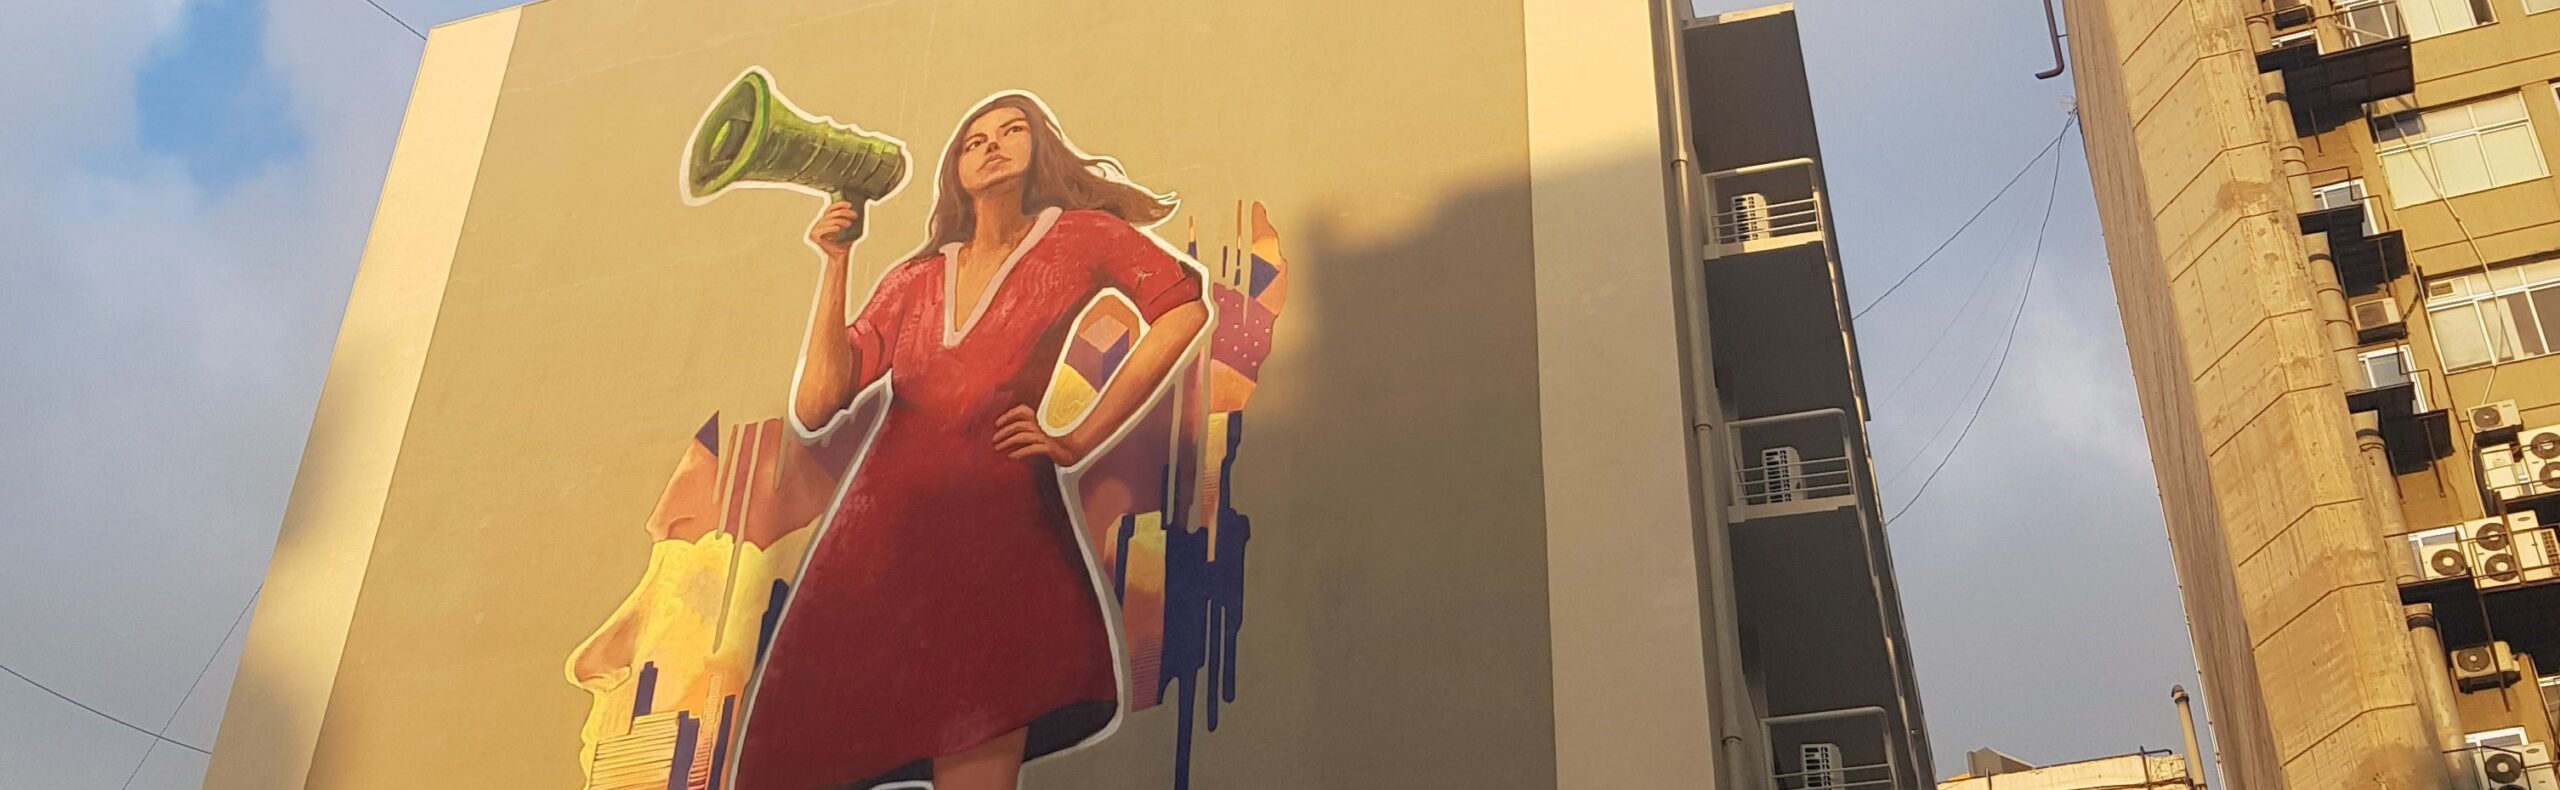 LADE Mural Inspires Women in Beirut to Lead